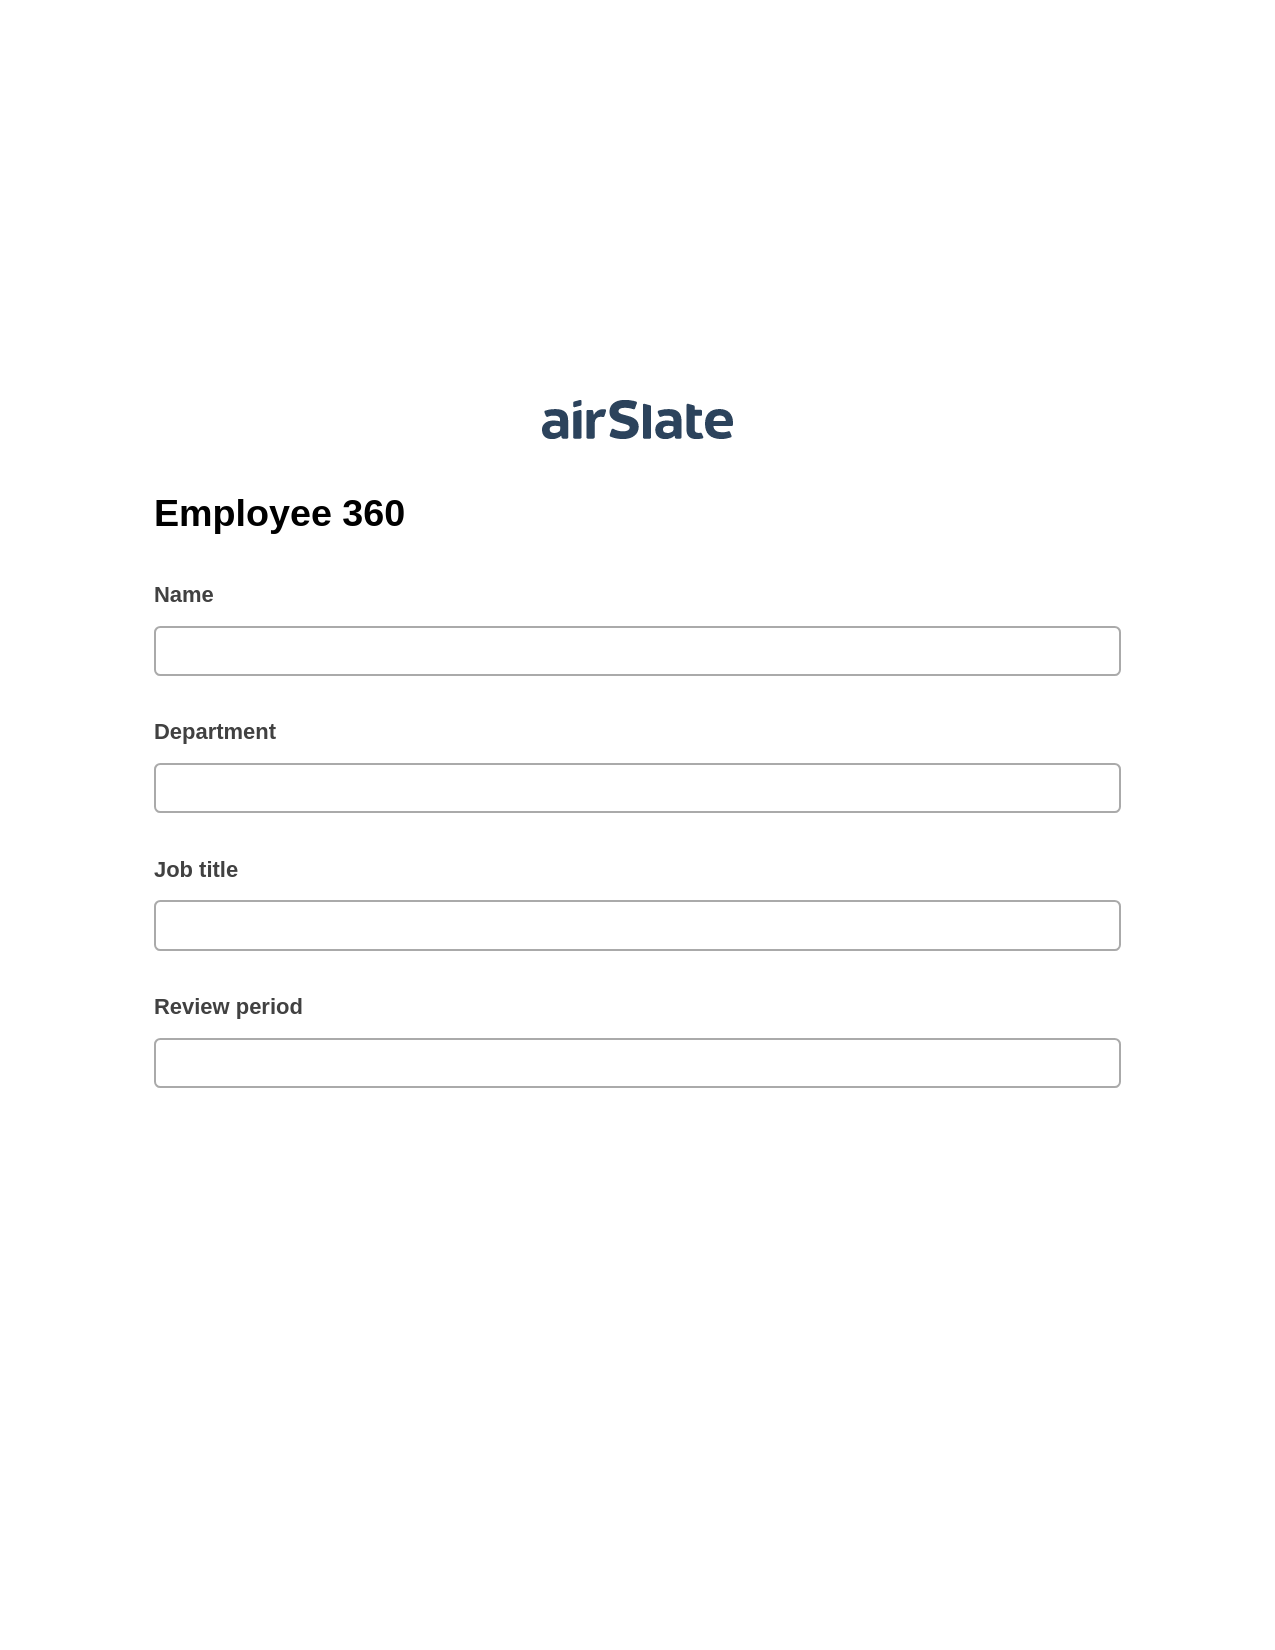 Employee 360 Pre-fill from another Slate Bot, Create QuickBooks Invoice Bot, Post-finish Document Bot